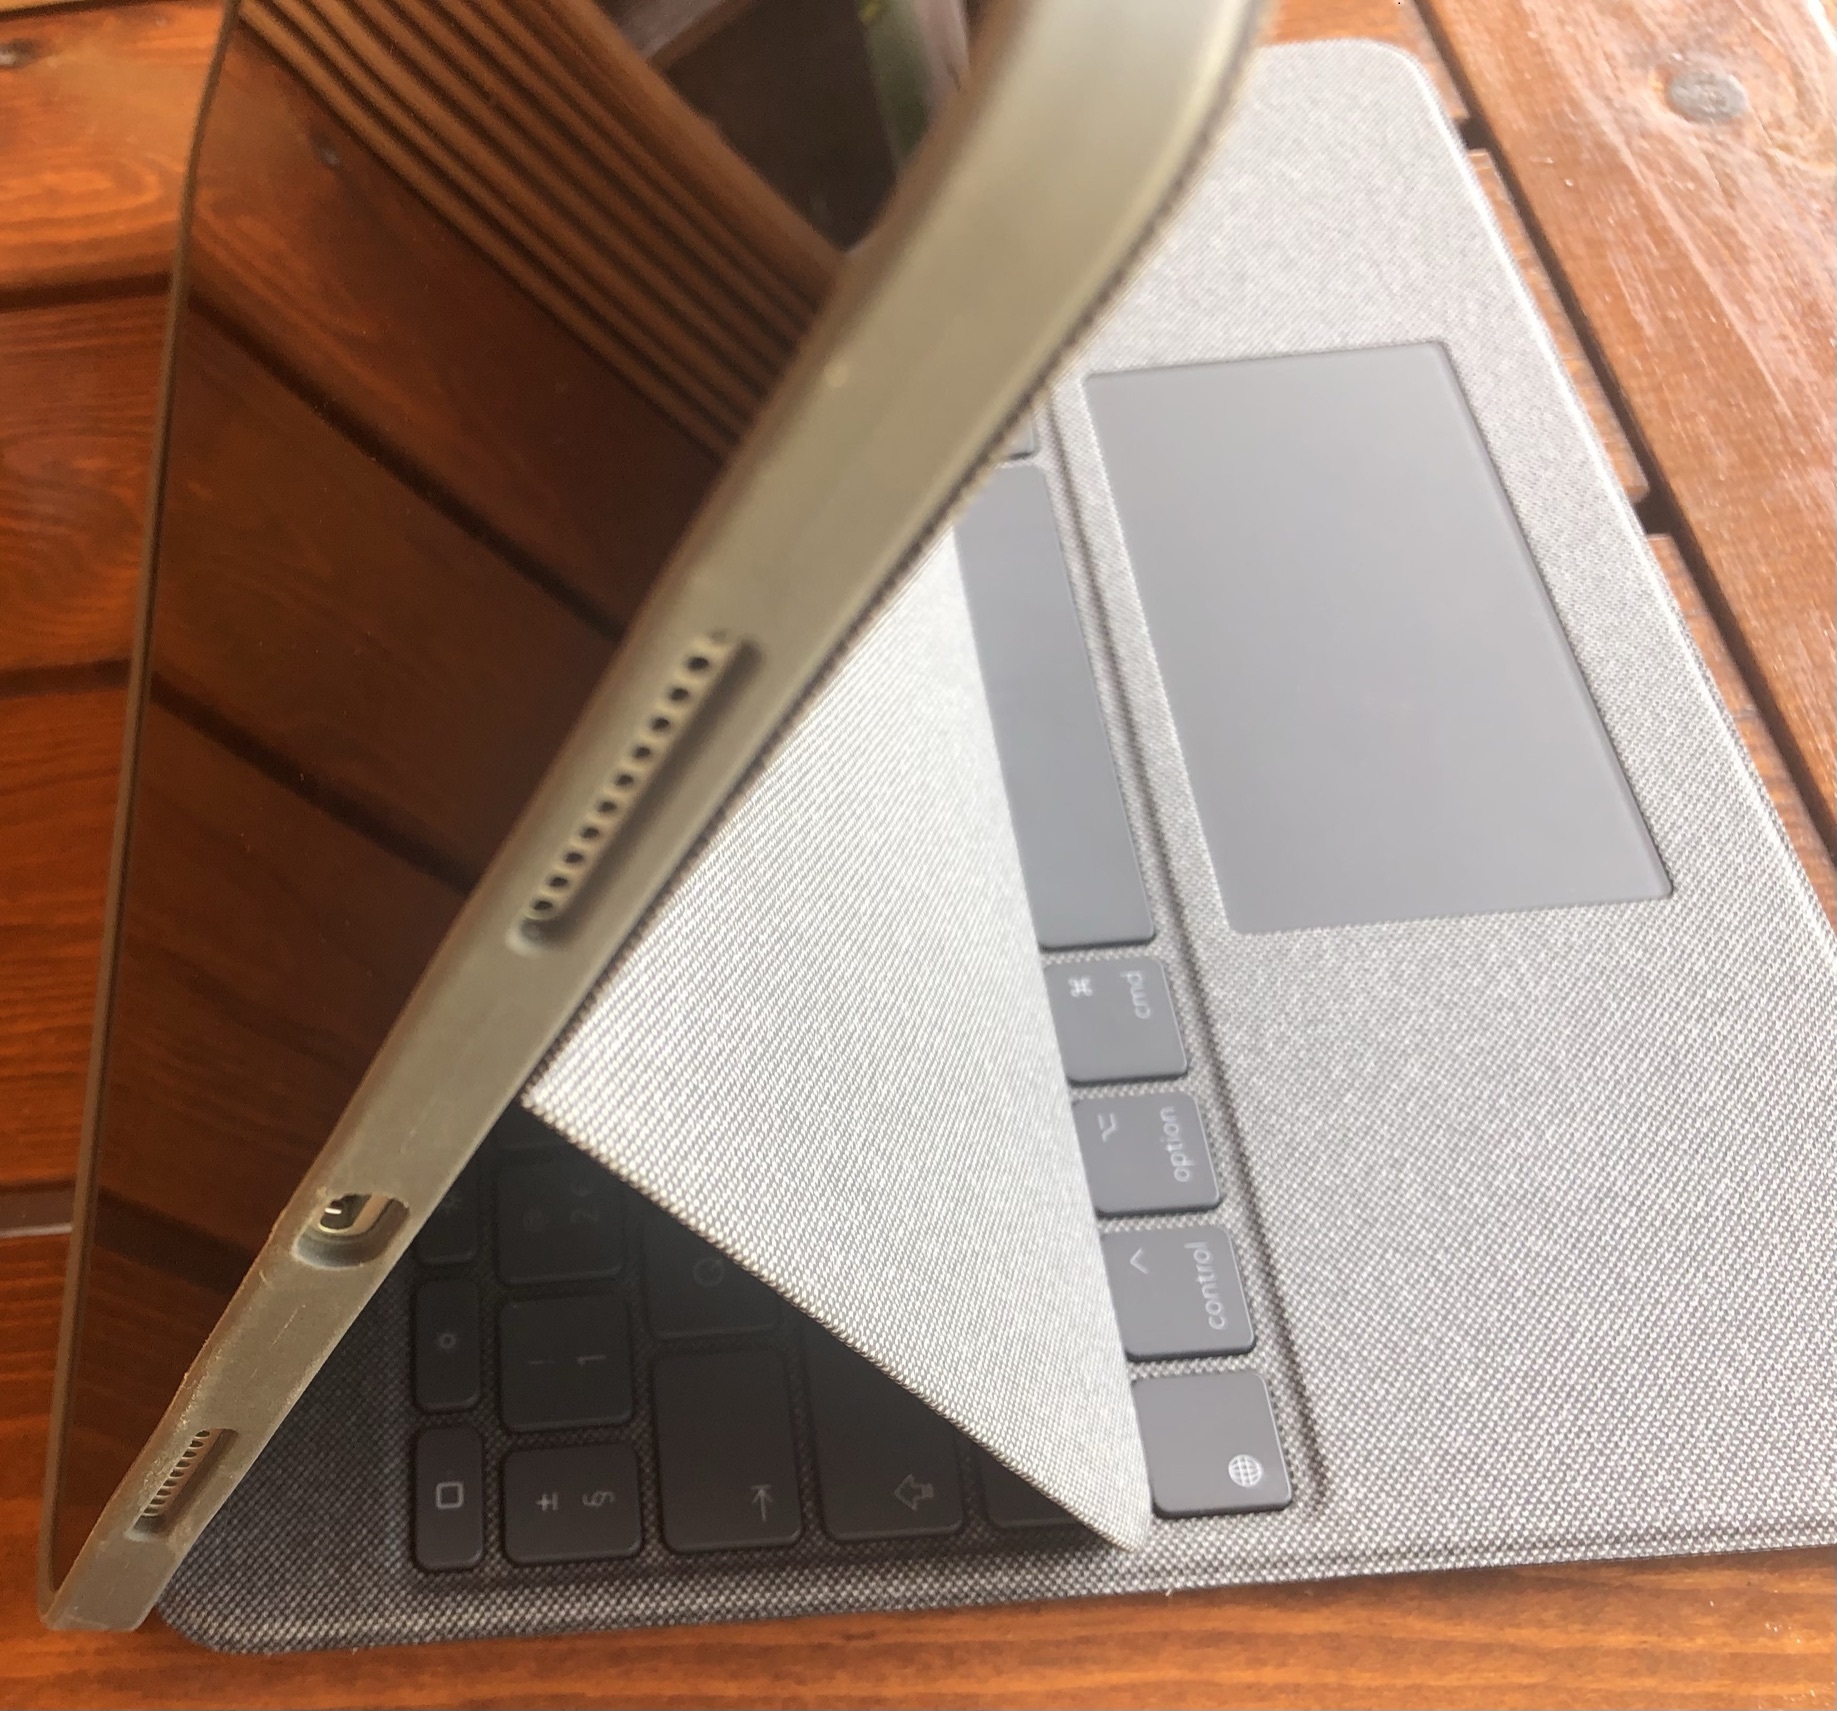 Misaligned case holes (Combo Touch iPad Pro 11). The microphone